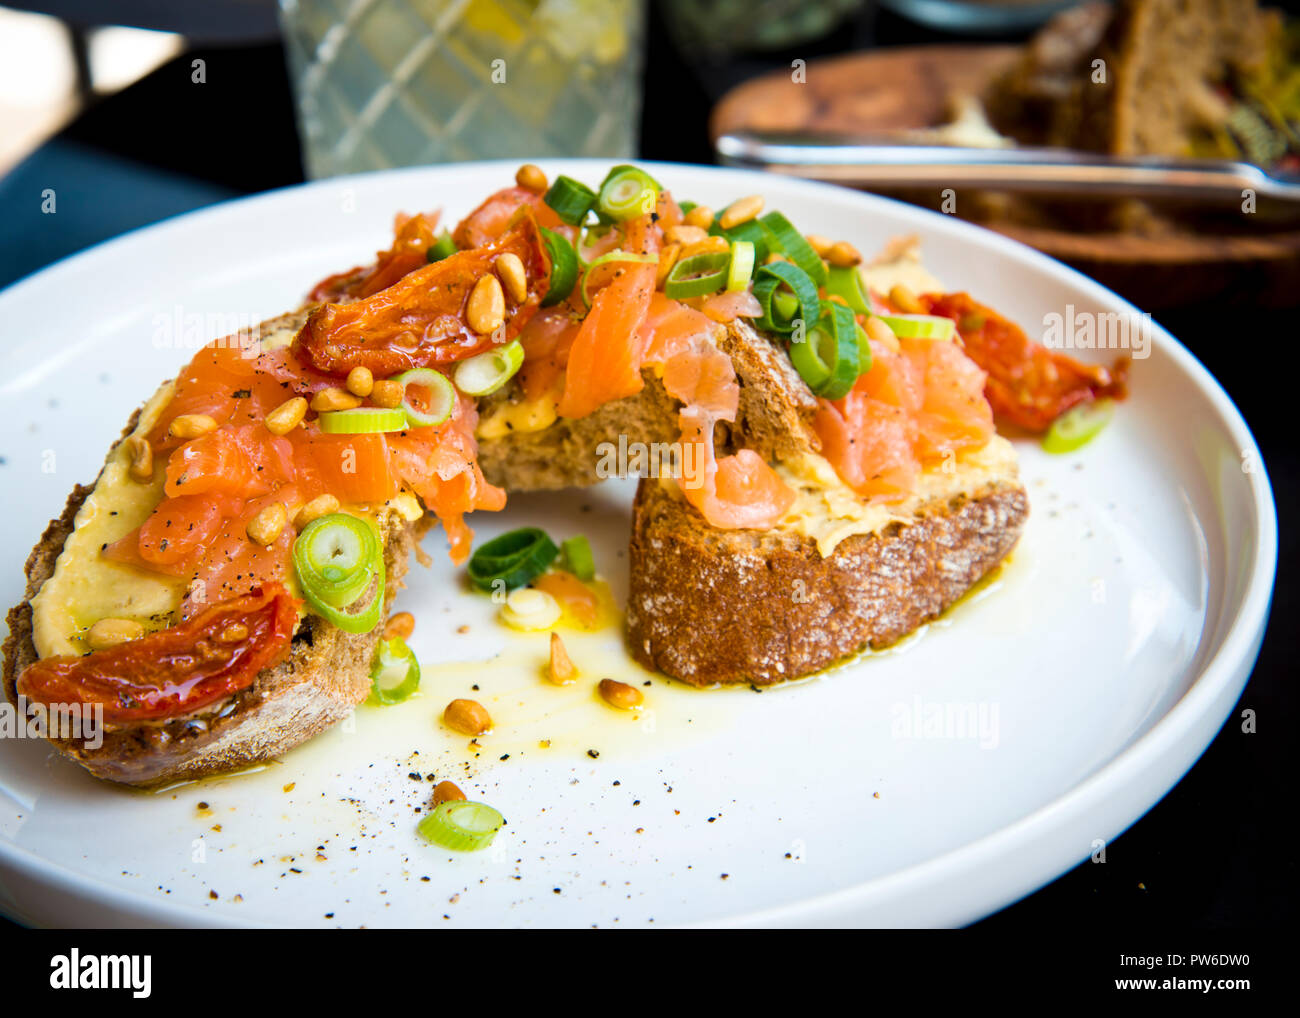 open sandwich for a good healthy option,grilled cheese on brown bread,topped with fresh salmon,chopped spring onion,sun dried tomatoes light lunch. Stock Photo